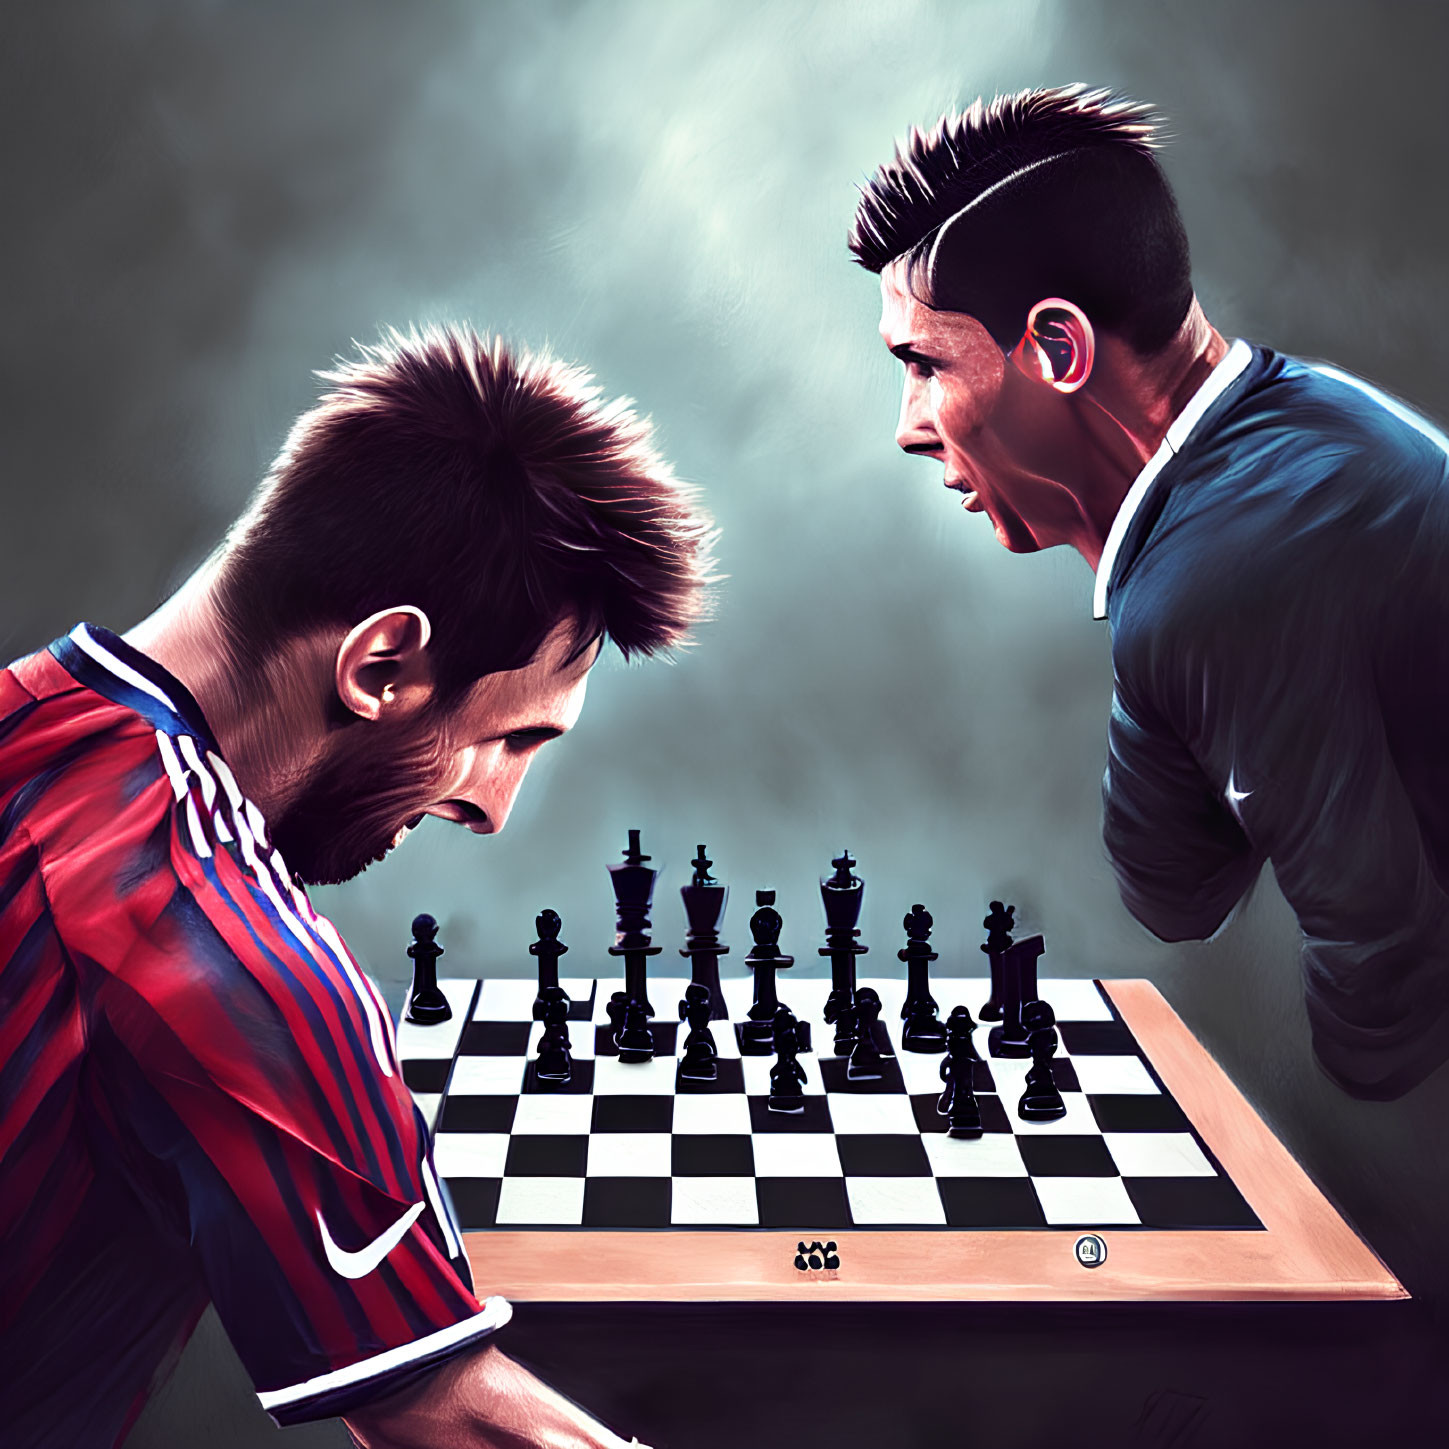 Stylized male figures in soccer player attire face off over a chessboard